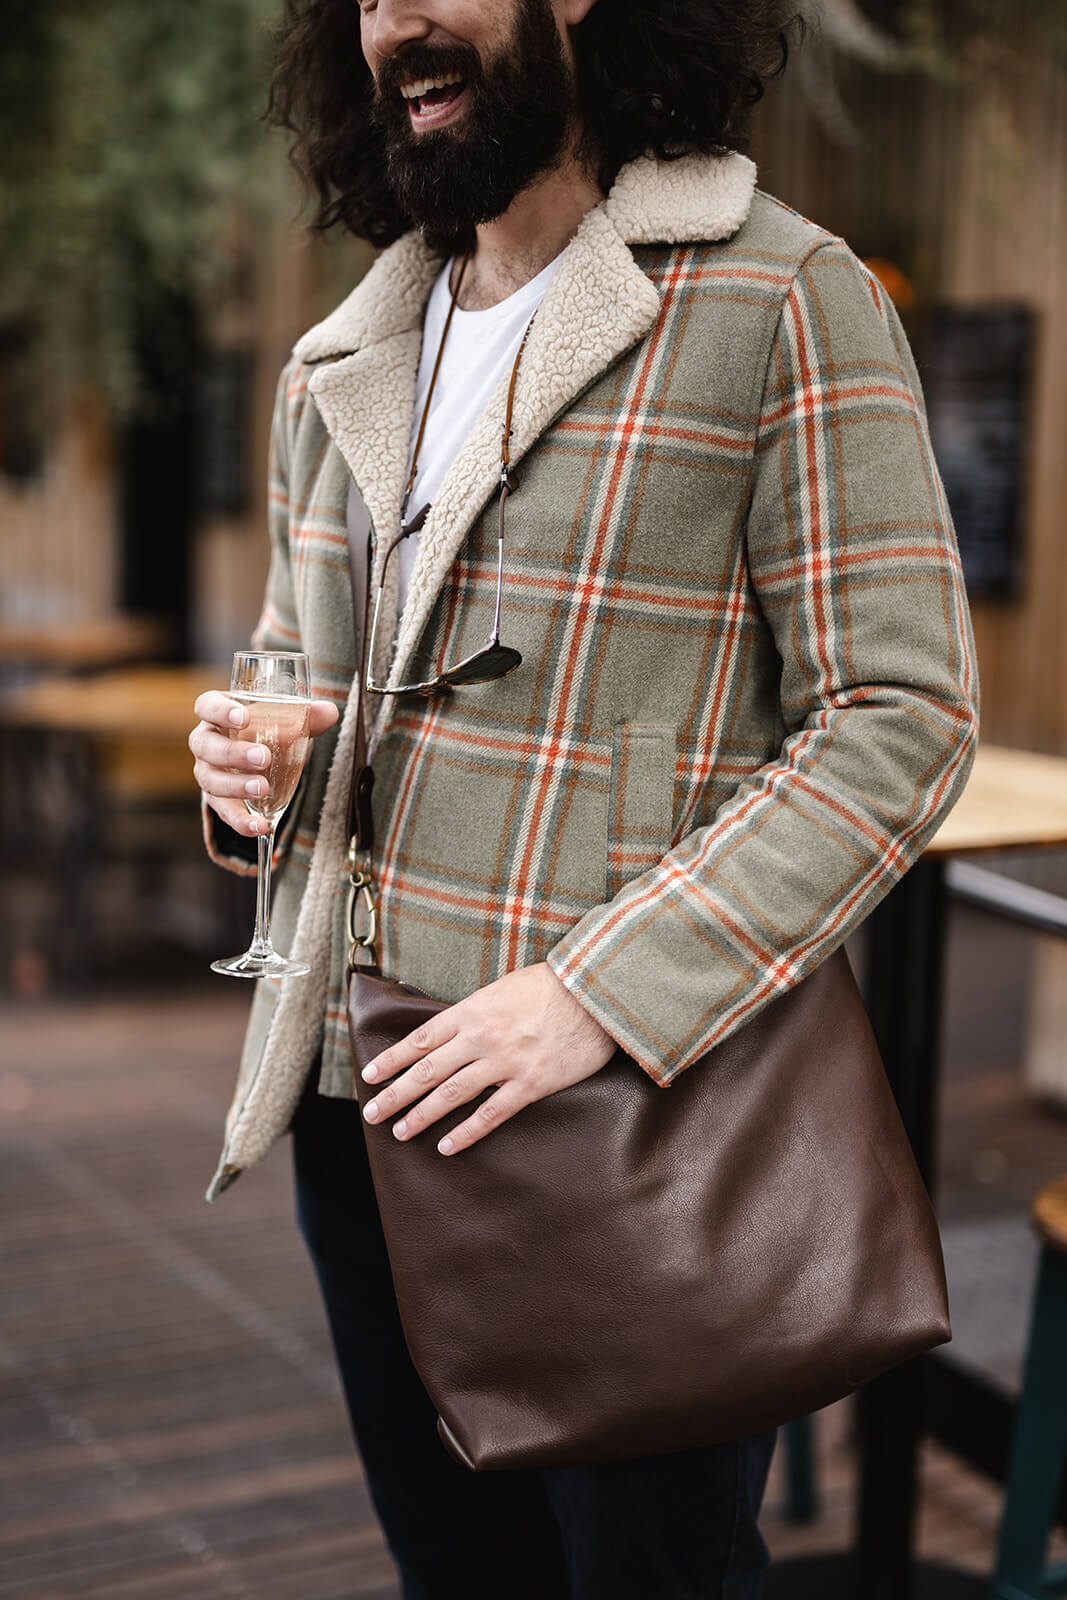 Man in Winter clothing holding a glass of champagne and a crossbody brown leather bag in the other. The bag is the Ella Jackson Chocolate Brown Leather Carryall